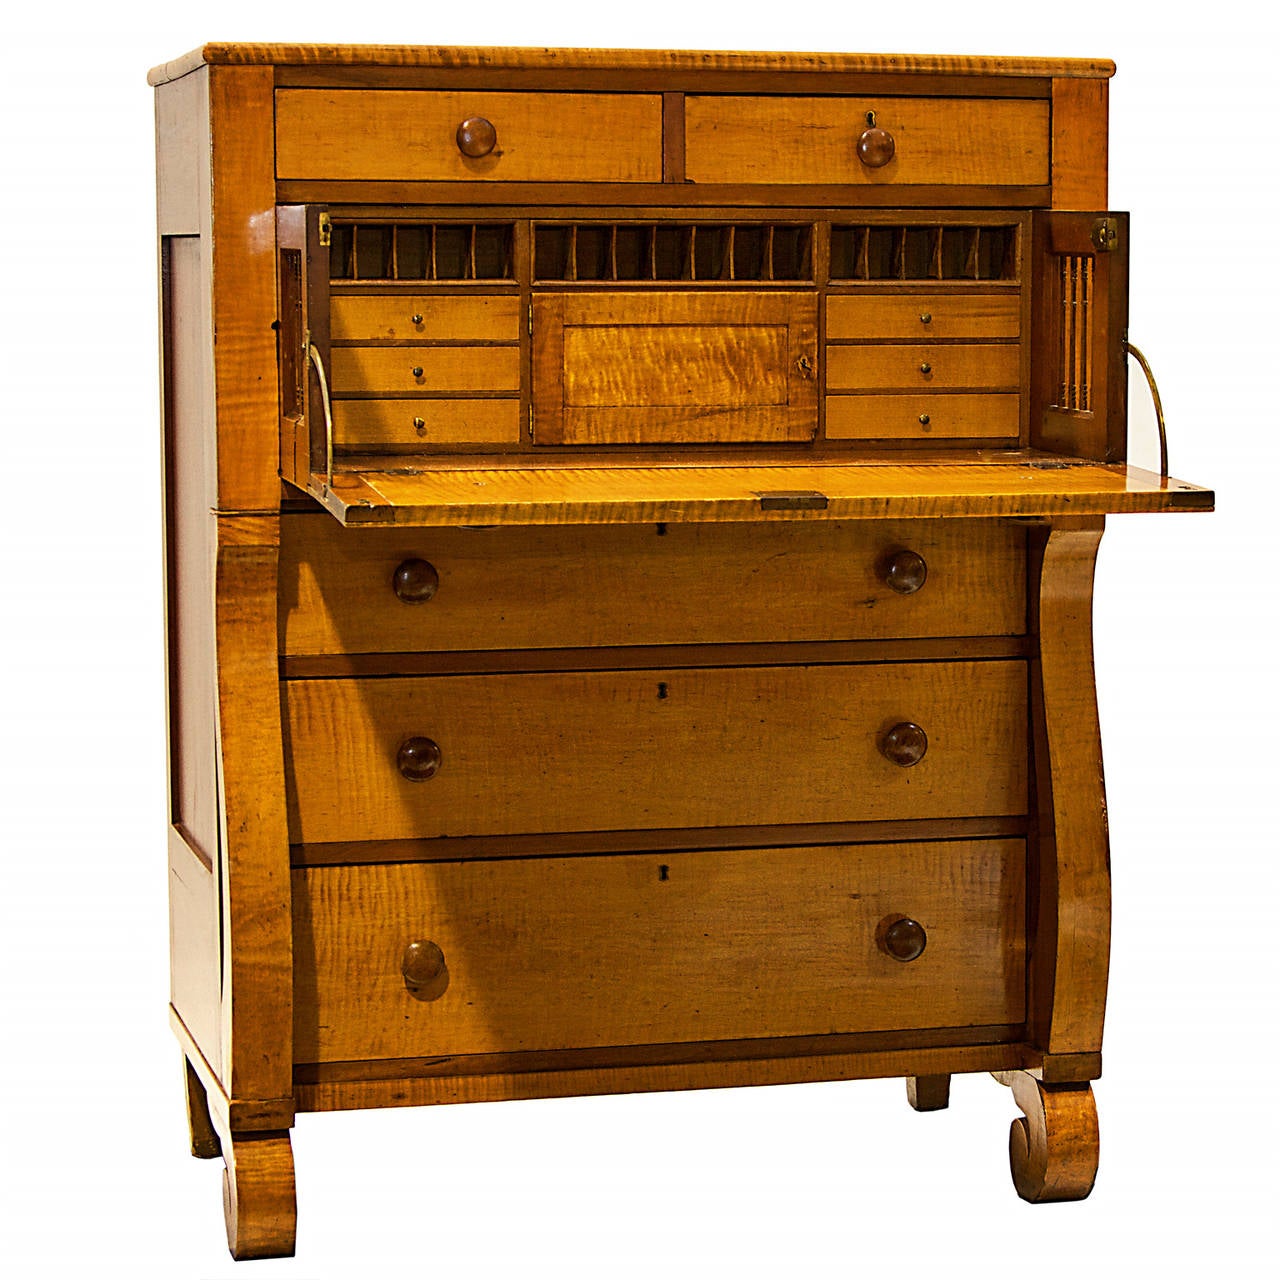 A 19th century American Empire maple and cherrywood chest with drop front secretaire drawer and fitted interior. The front is presented with tiger maple and cherrywood sides and top. This piece has wooden knobs and functions very well. Drawers slide